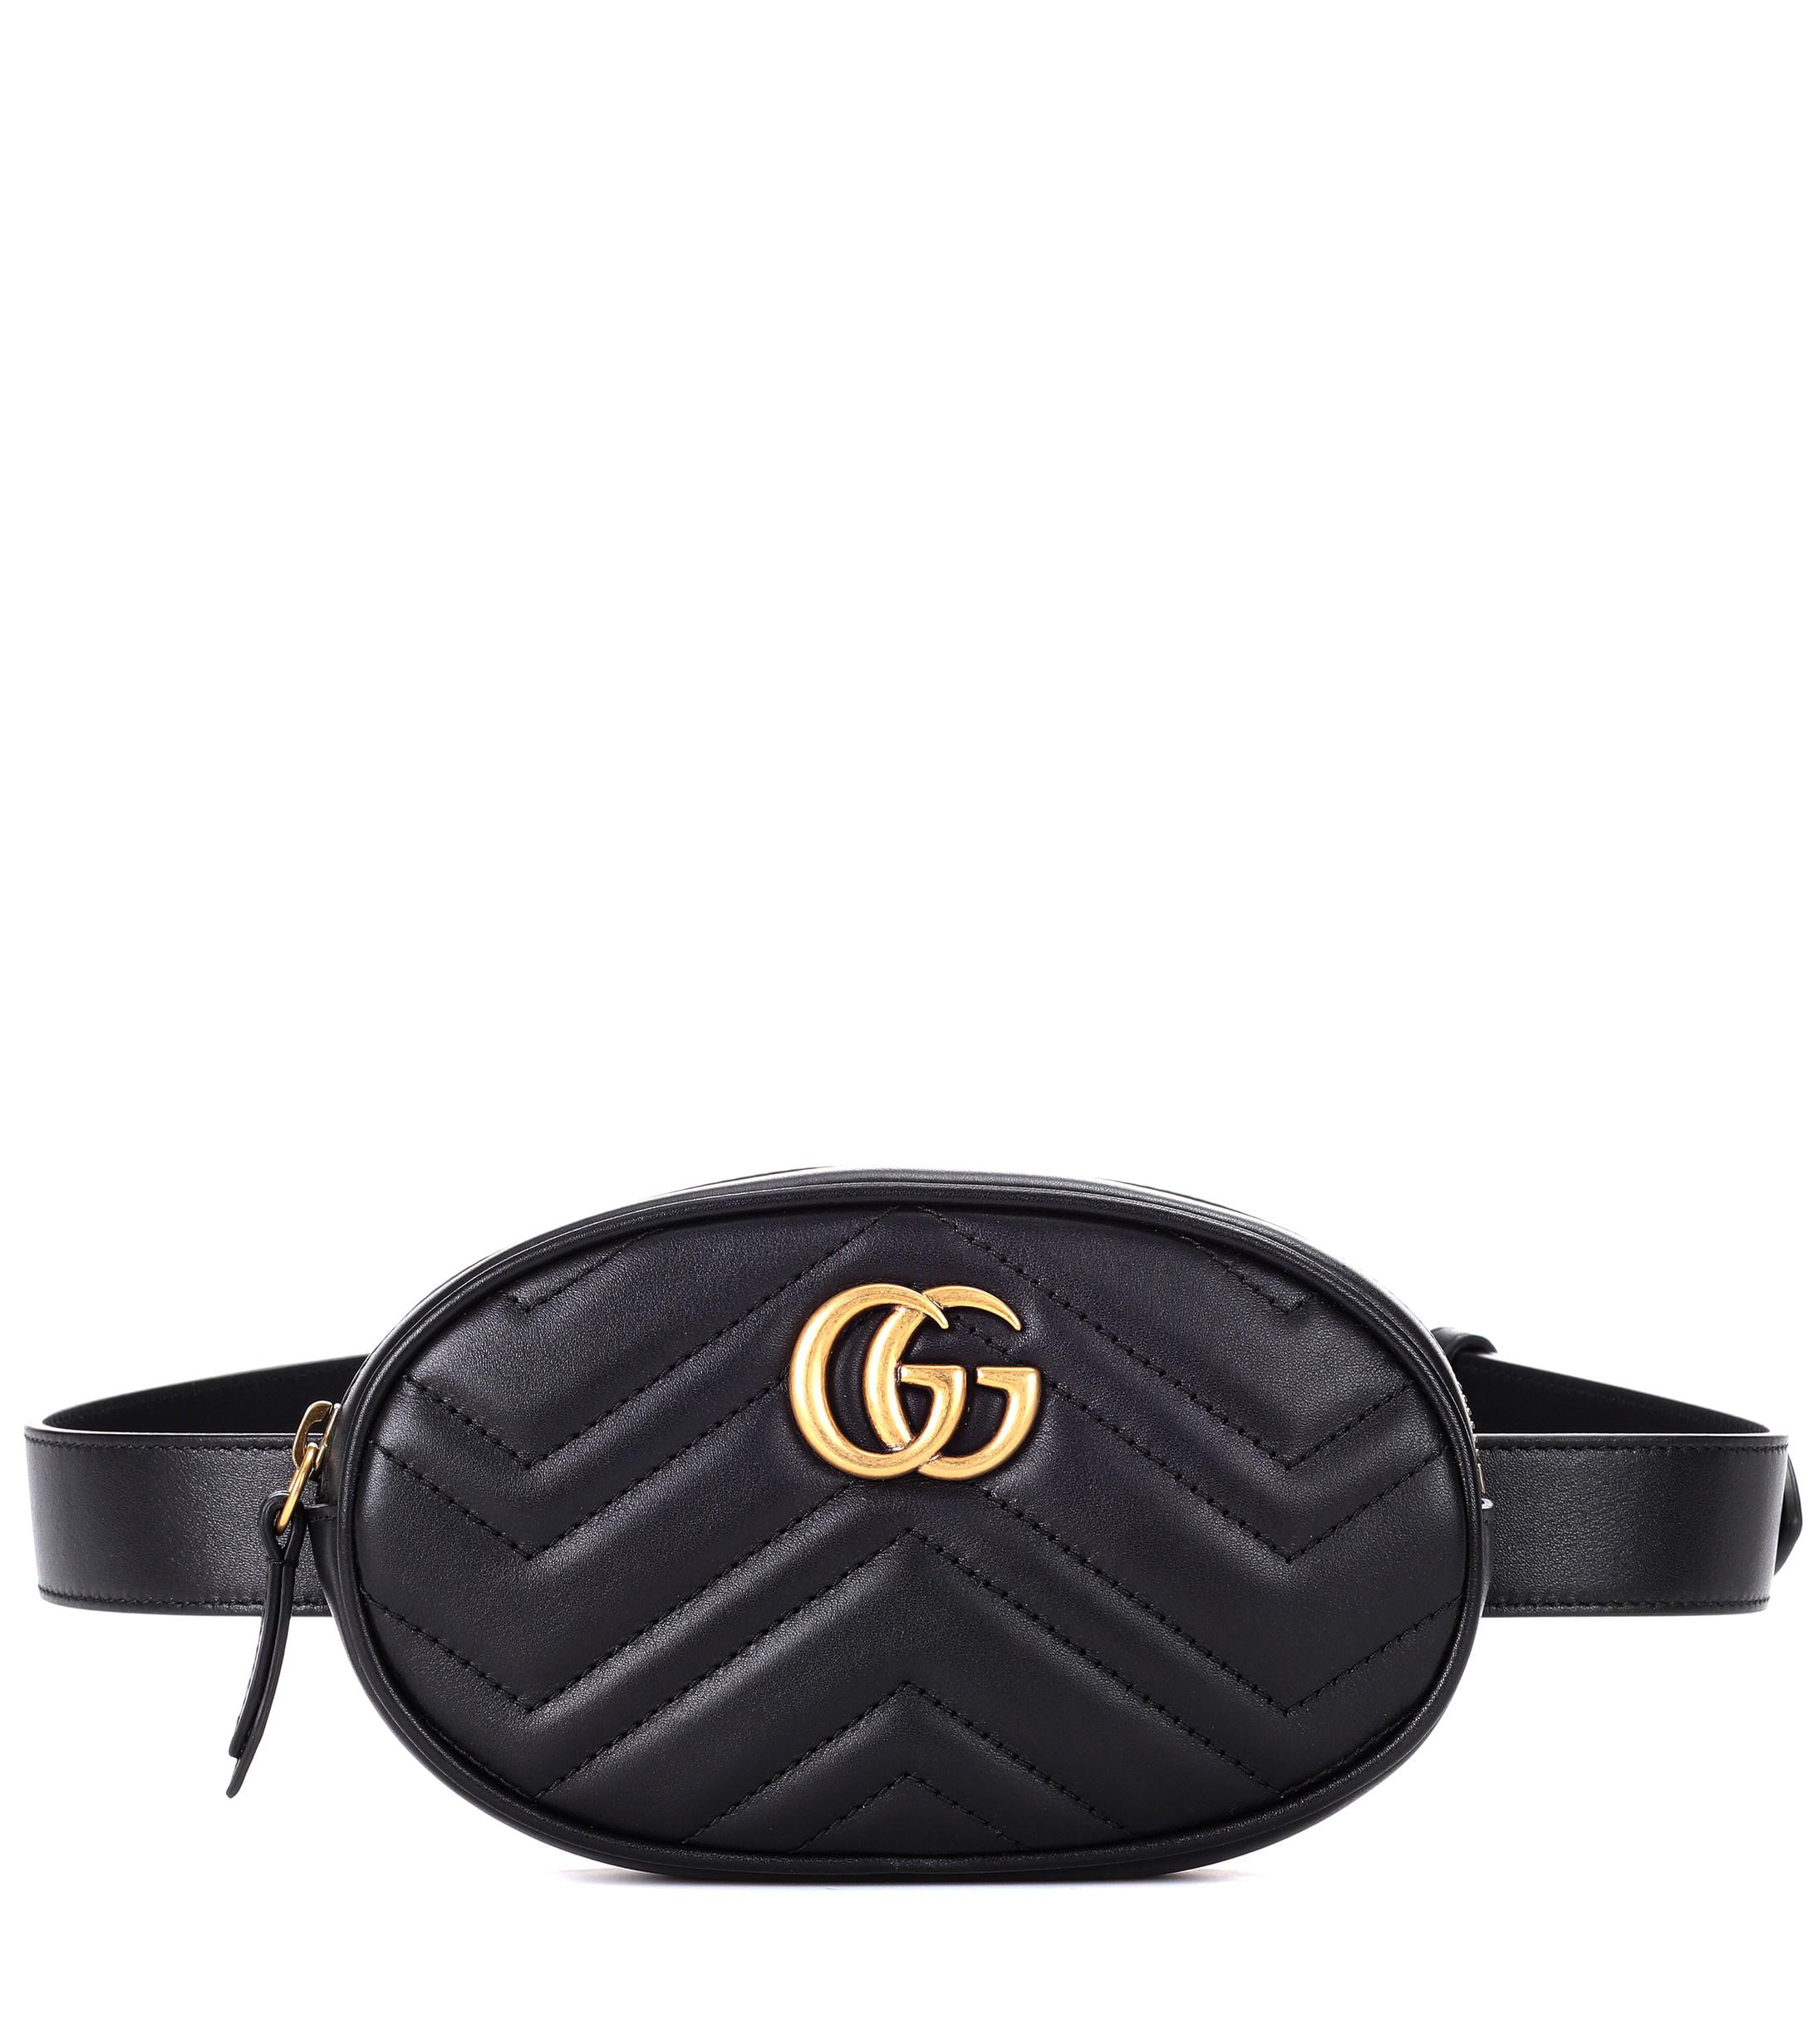 Gucci Marmont Leather Belt Bag in Black - Lyst